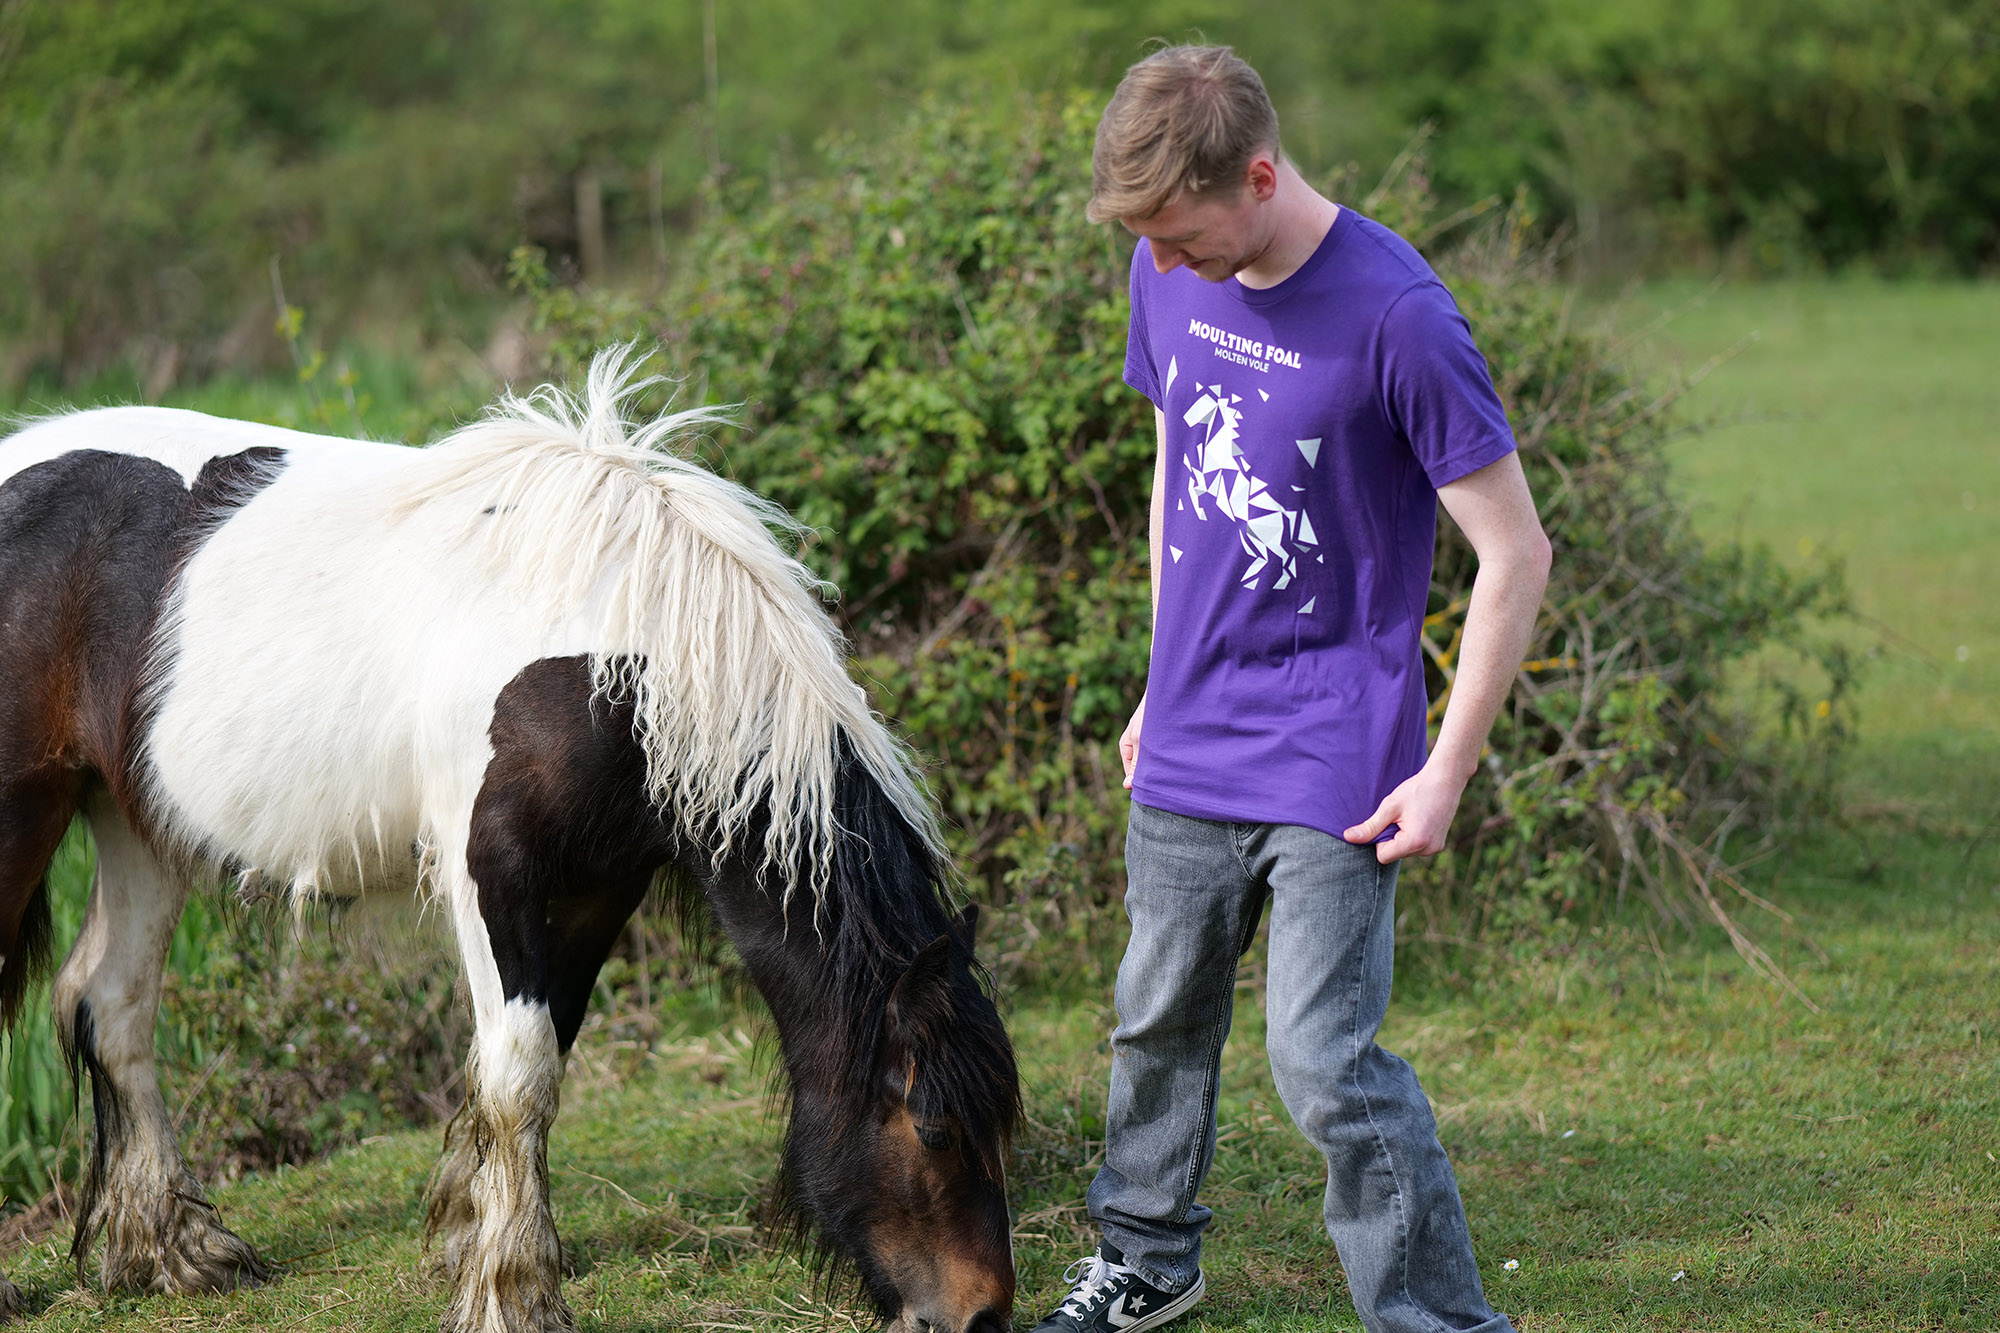 Moulting Foal tee photo 1